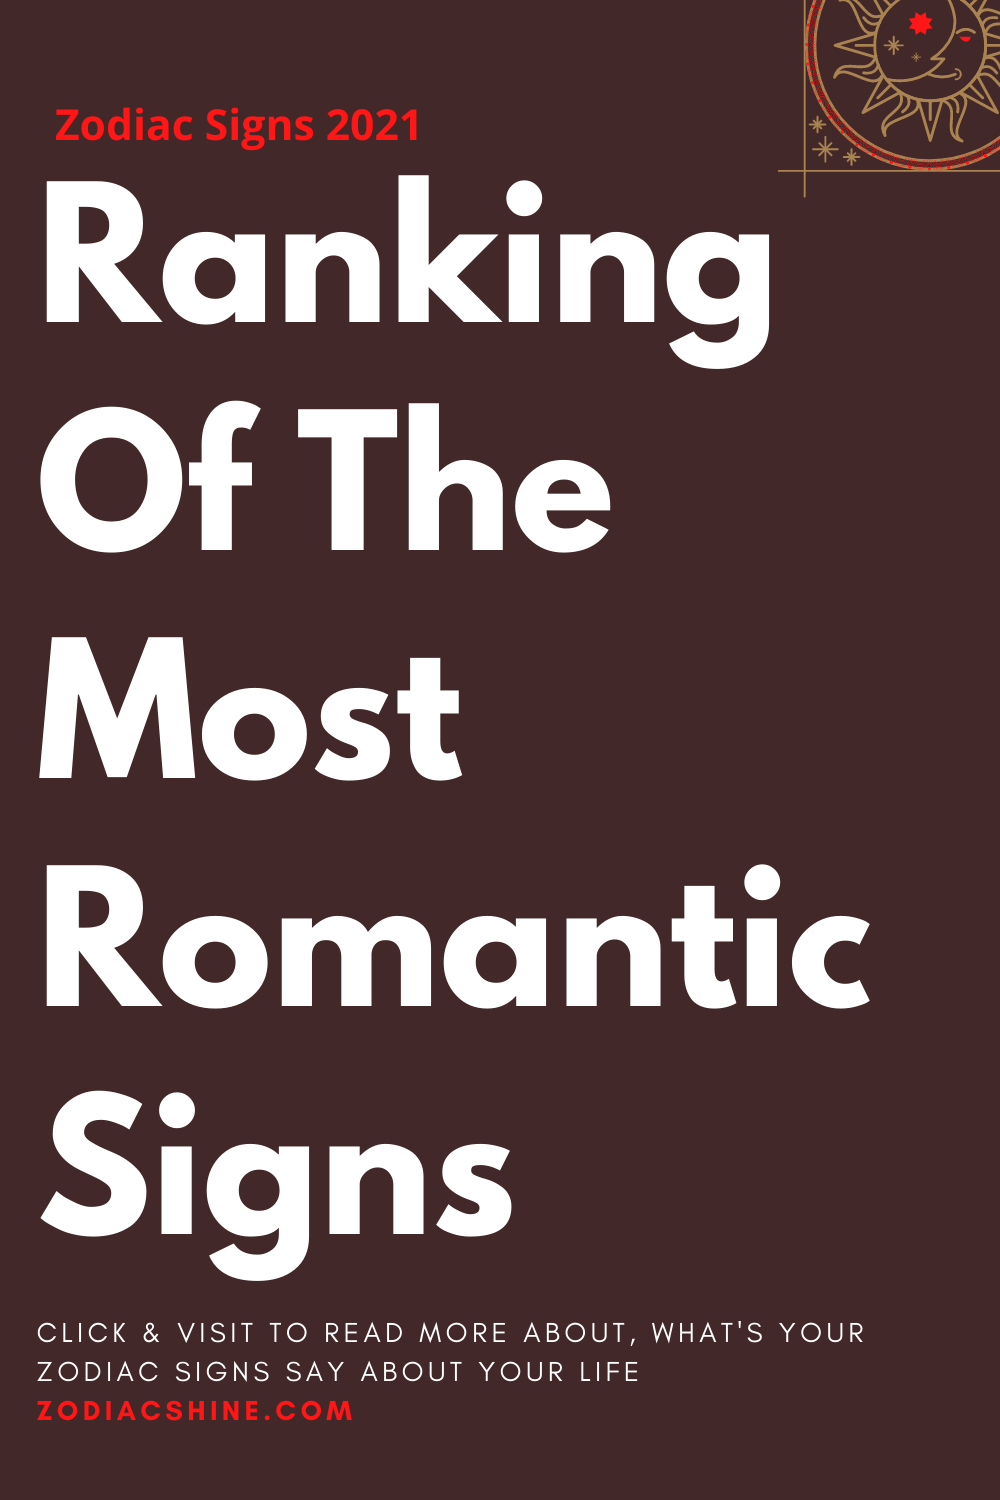 Ranking Of The Most Romantic Signs